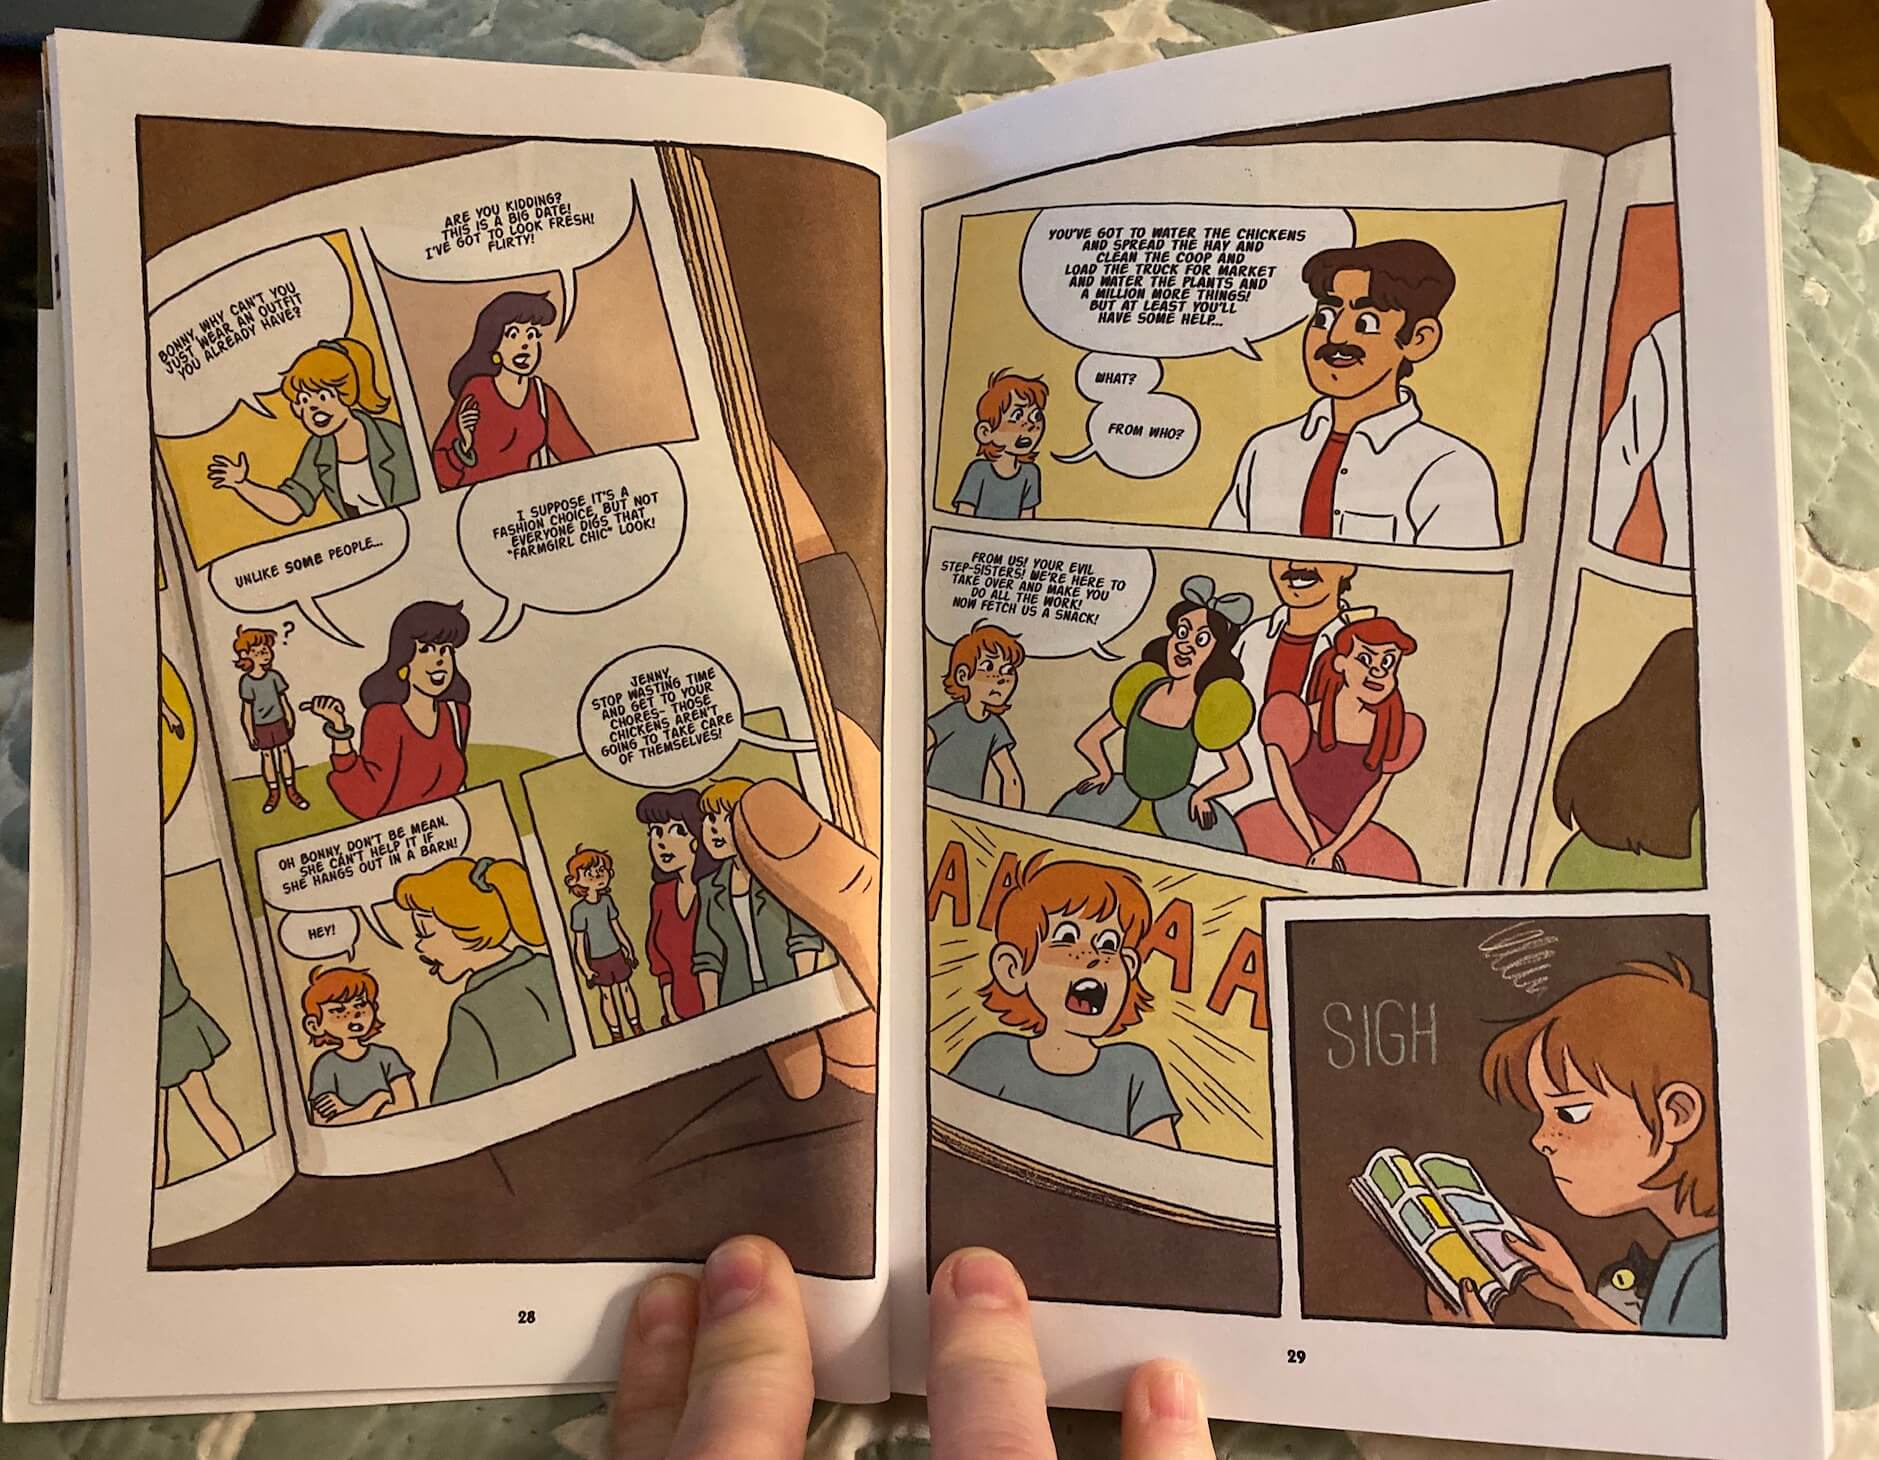 the pages show a comic book merging the reading experience and inner life of the main character